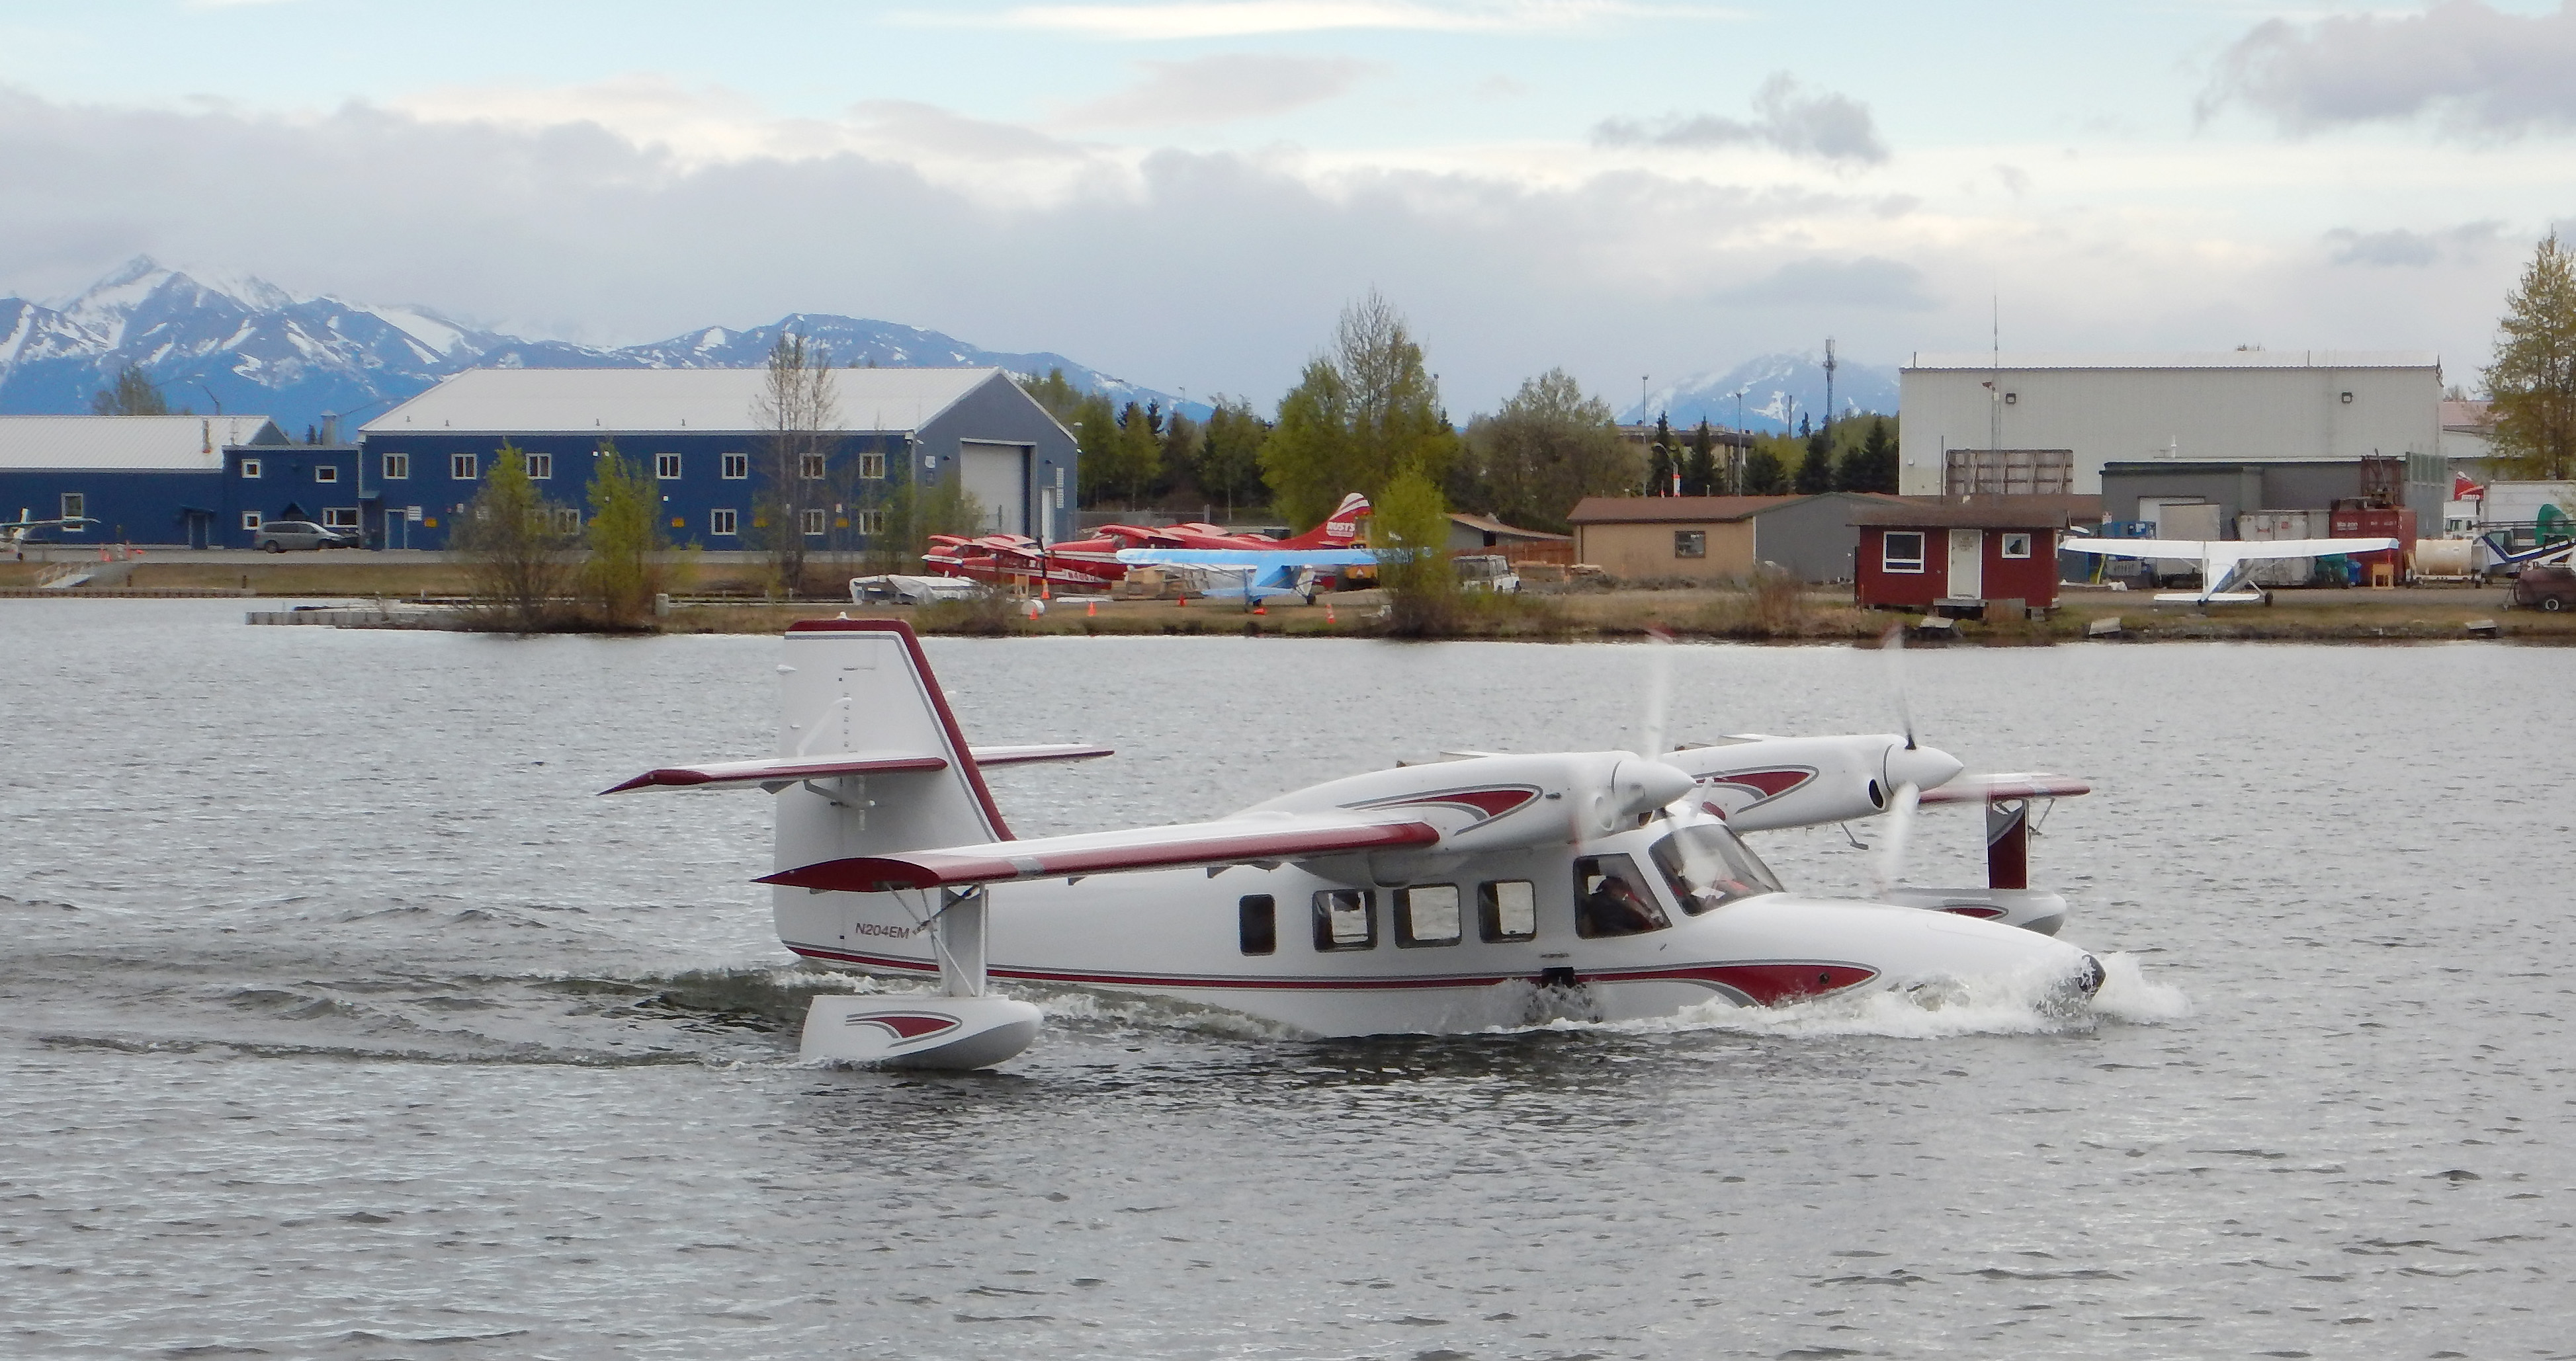 A Gweduck Aircraft twin-engine amphibian flying boat Grumman Widgeon lookalike will be among the static display aircraft at the AOPA Bremerton Fly-In Aug. 19 and 20, 2016. Photo by Warren Hendrickson.